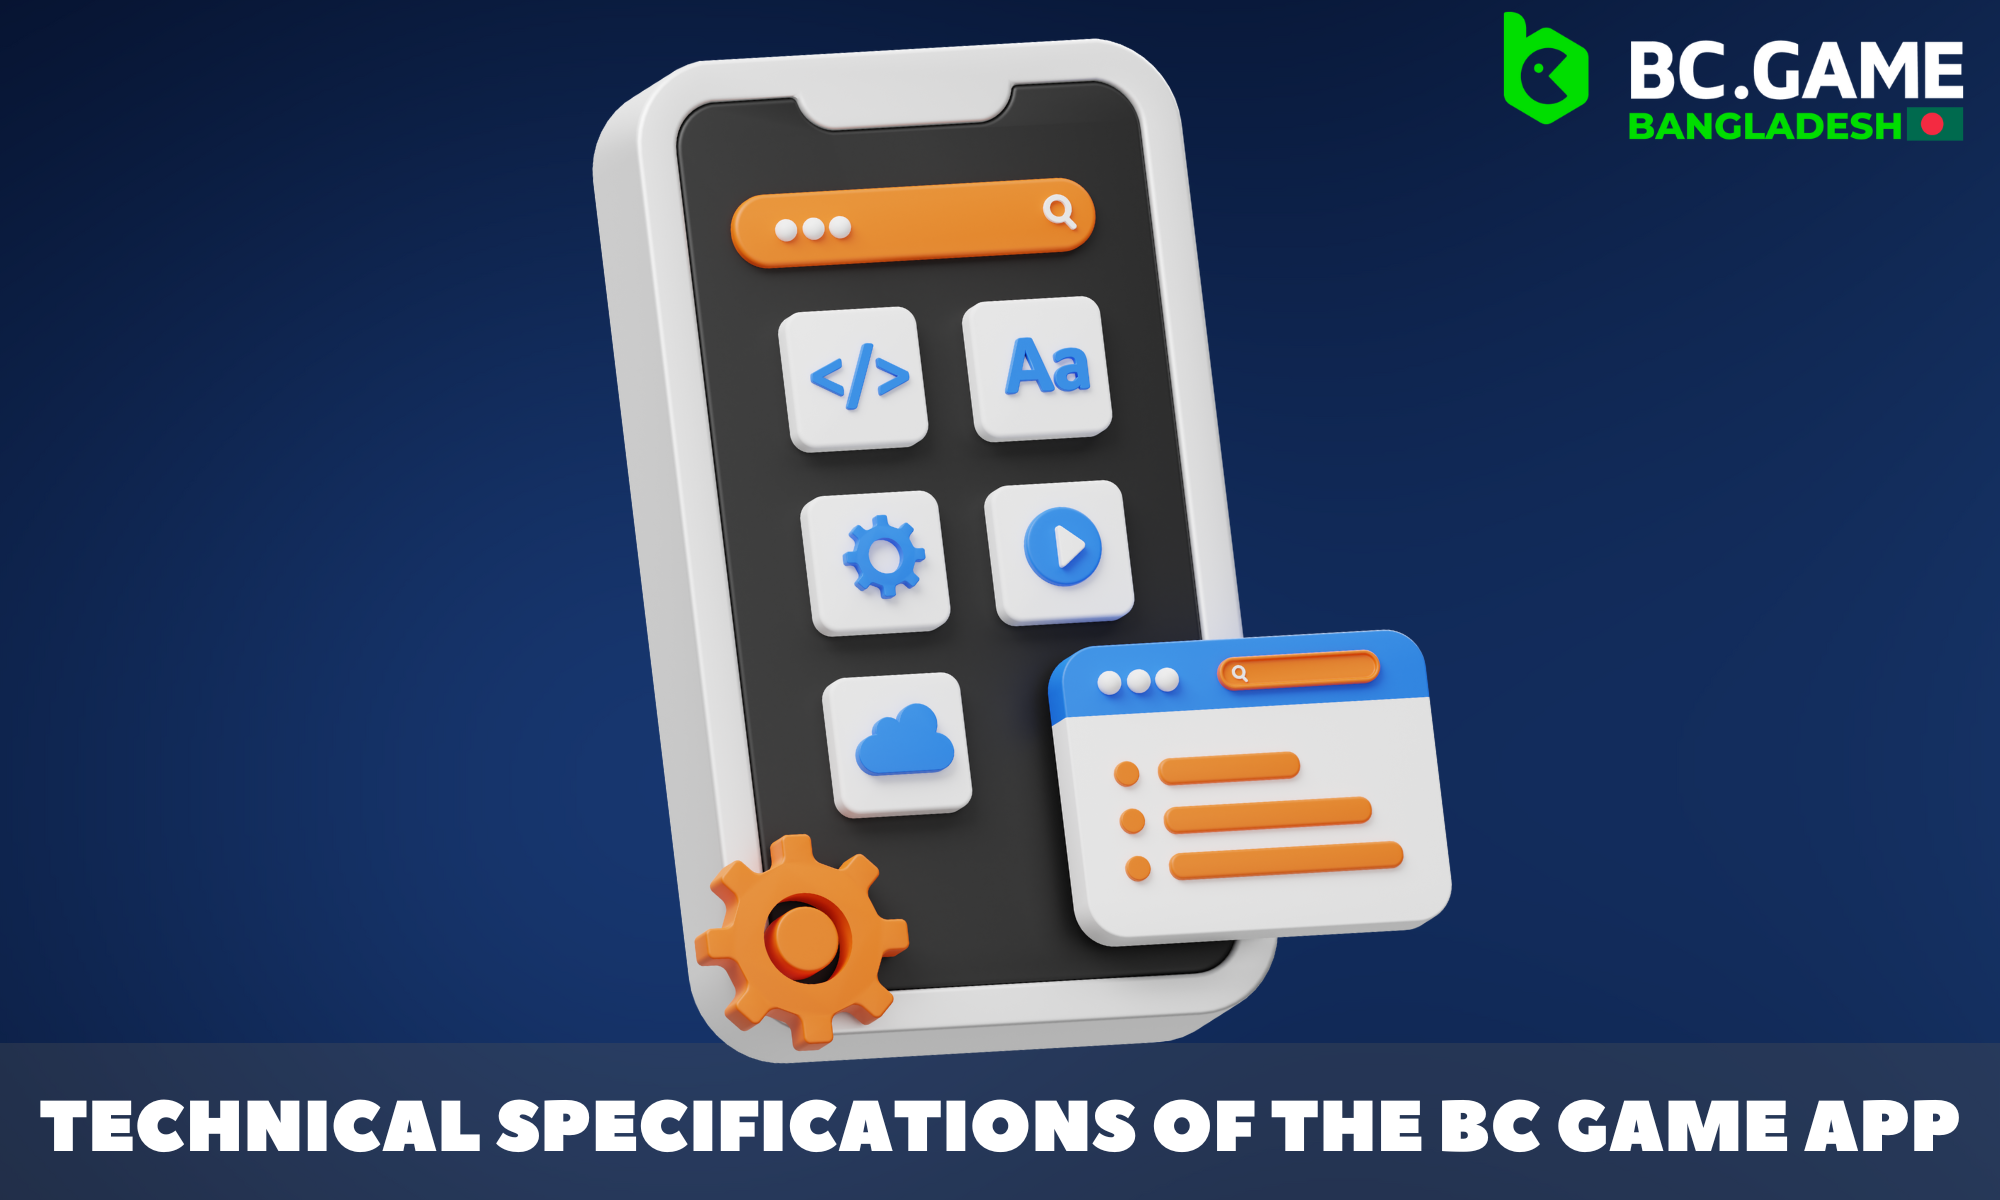 Overview of BC Game app features for Android and iOS